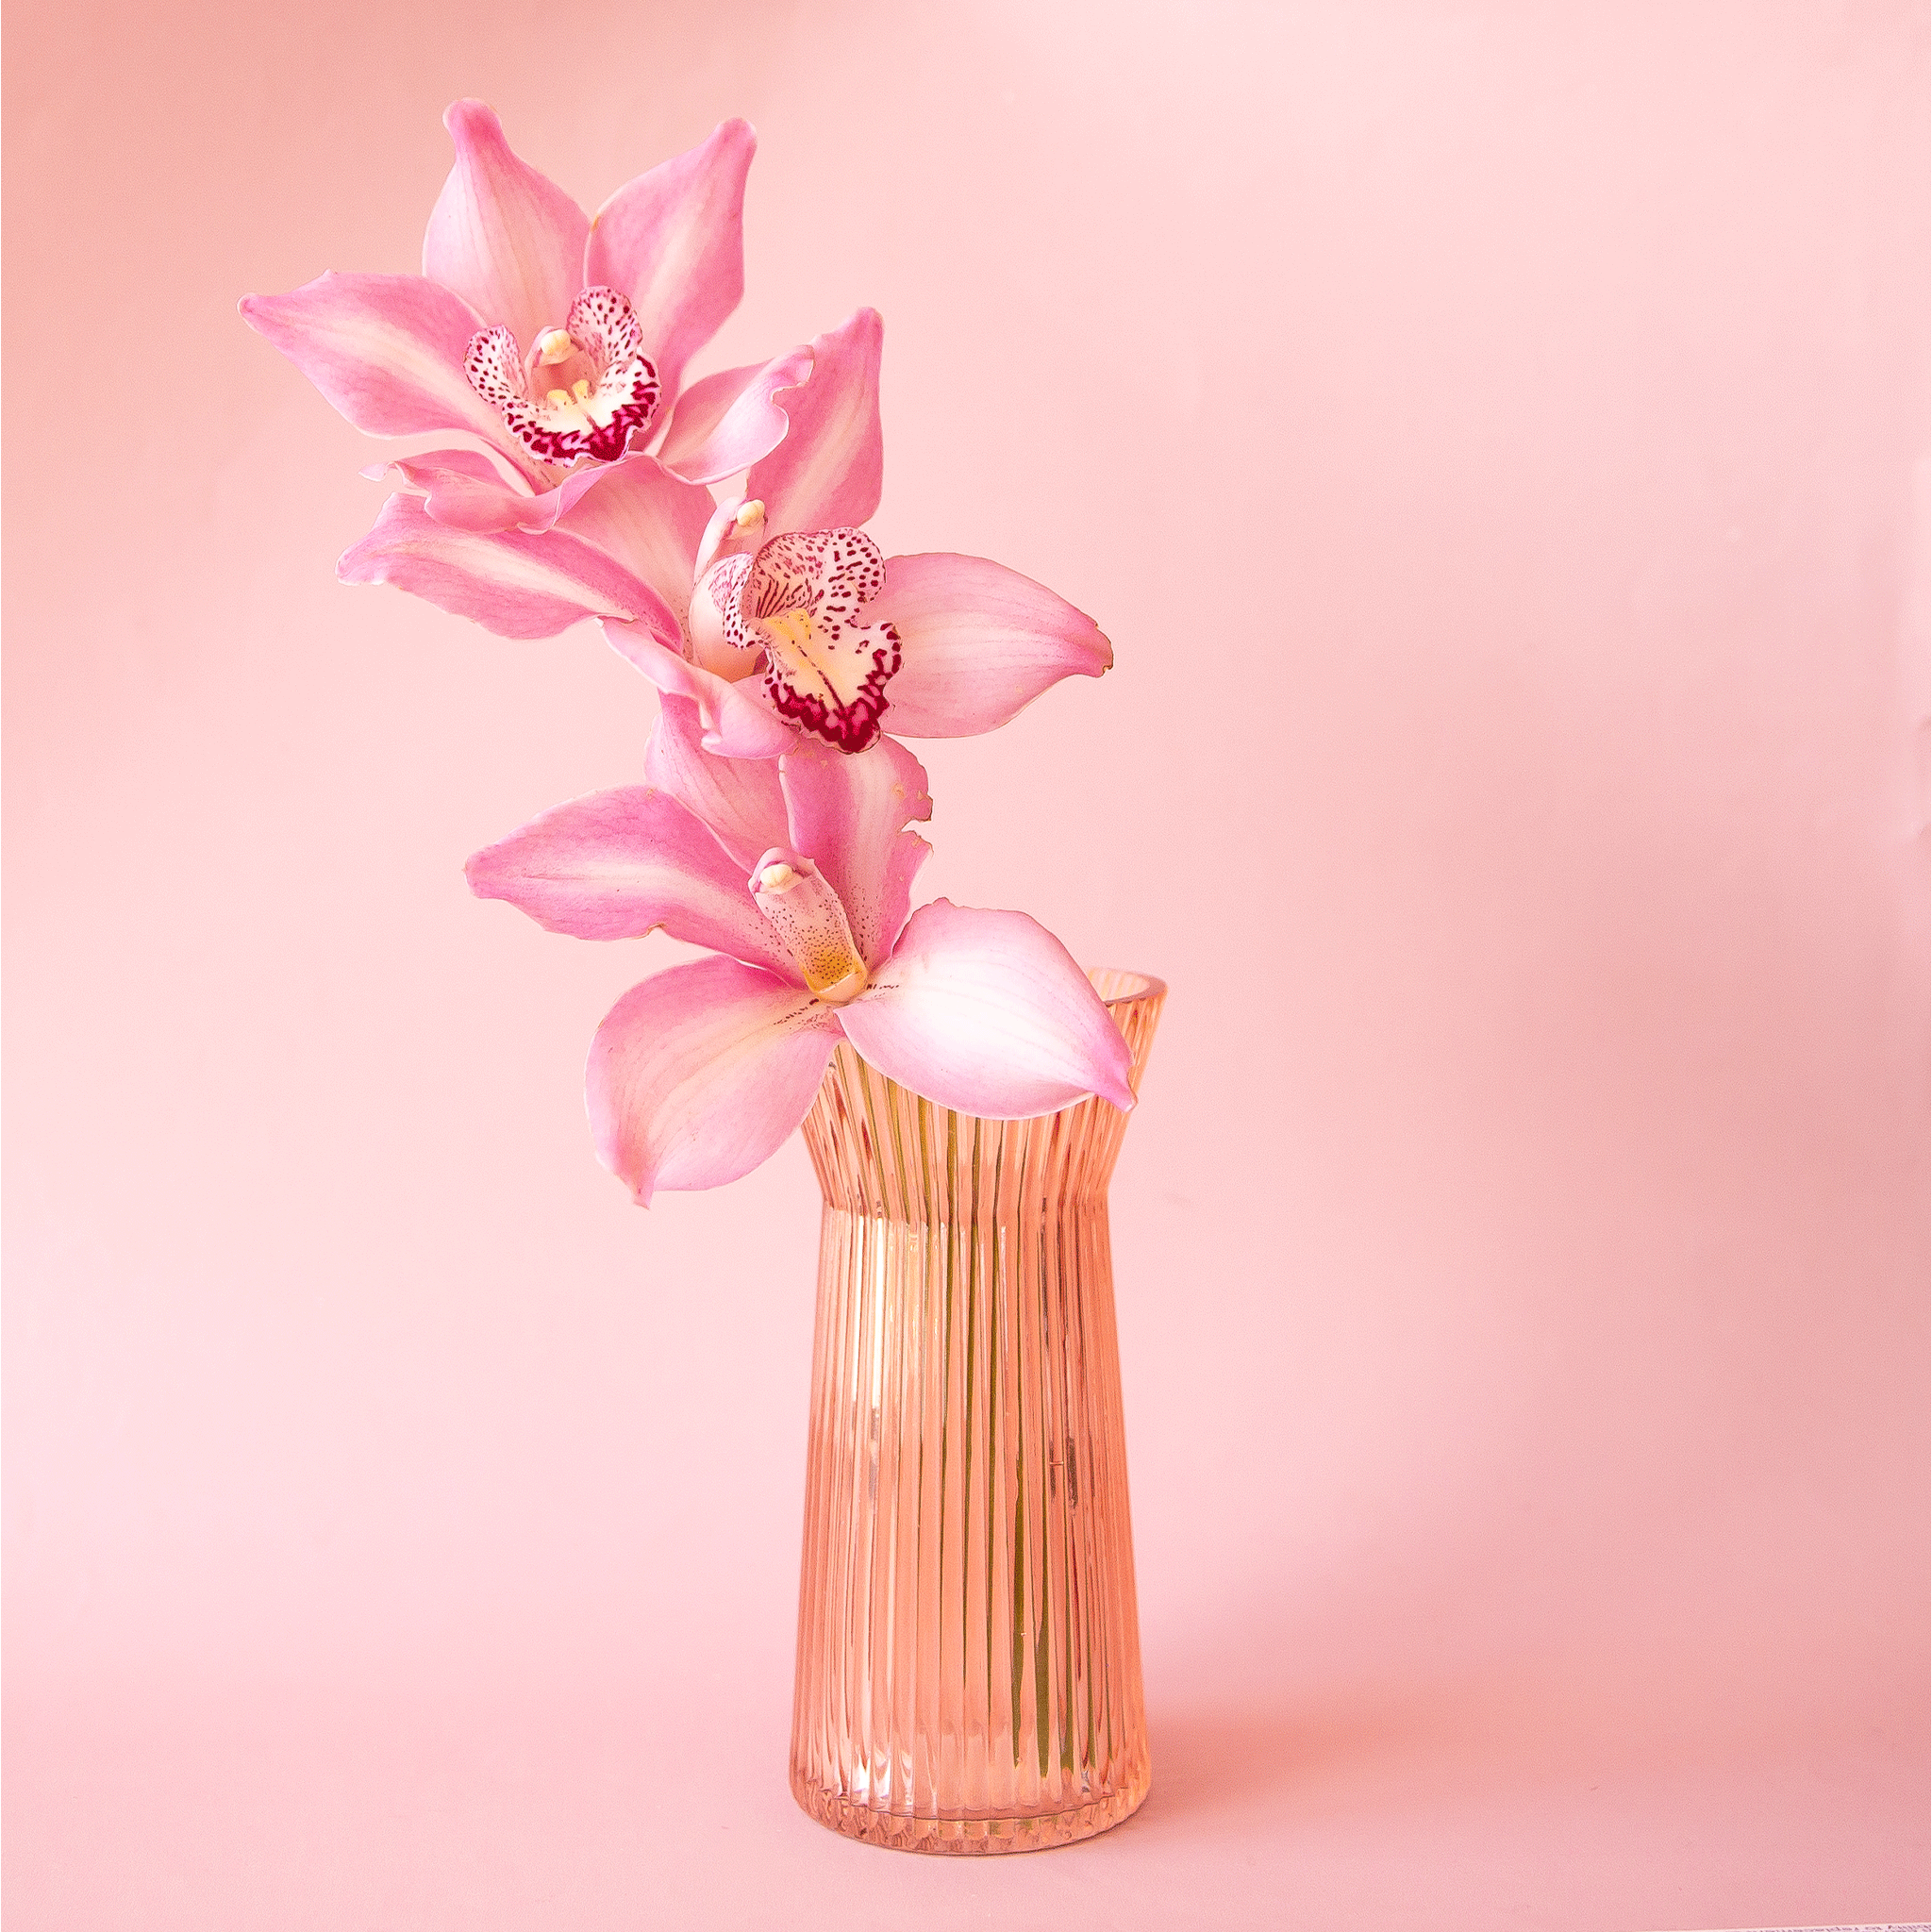 On a pink background is a apricot colored ribbed glass vase with a pink orchid inside. 